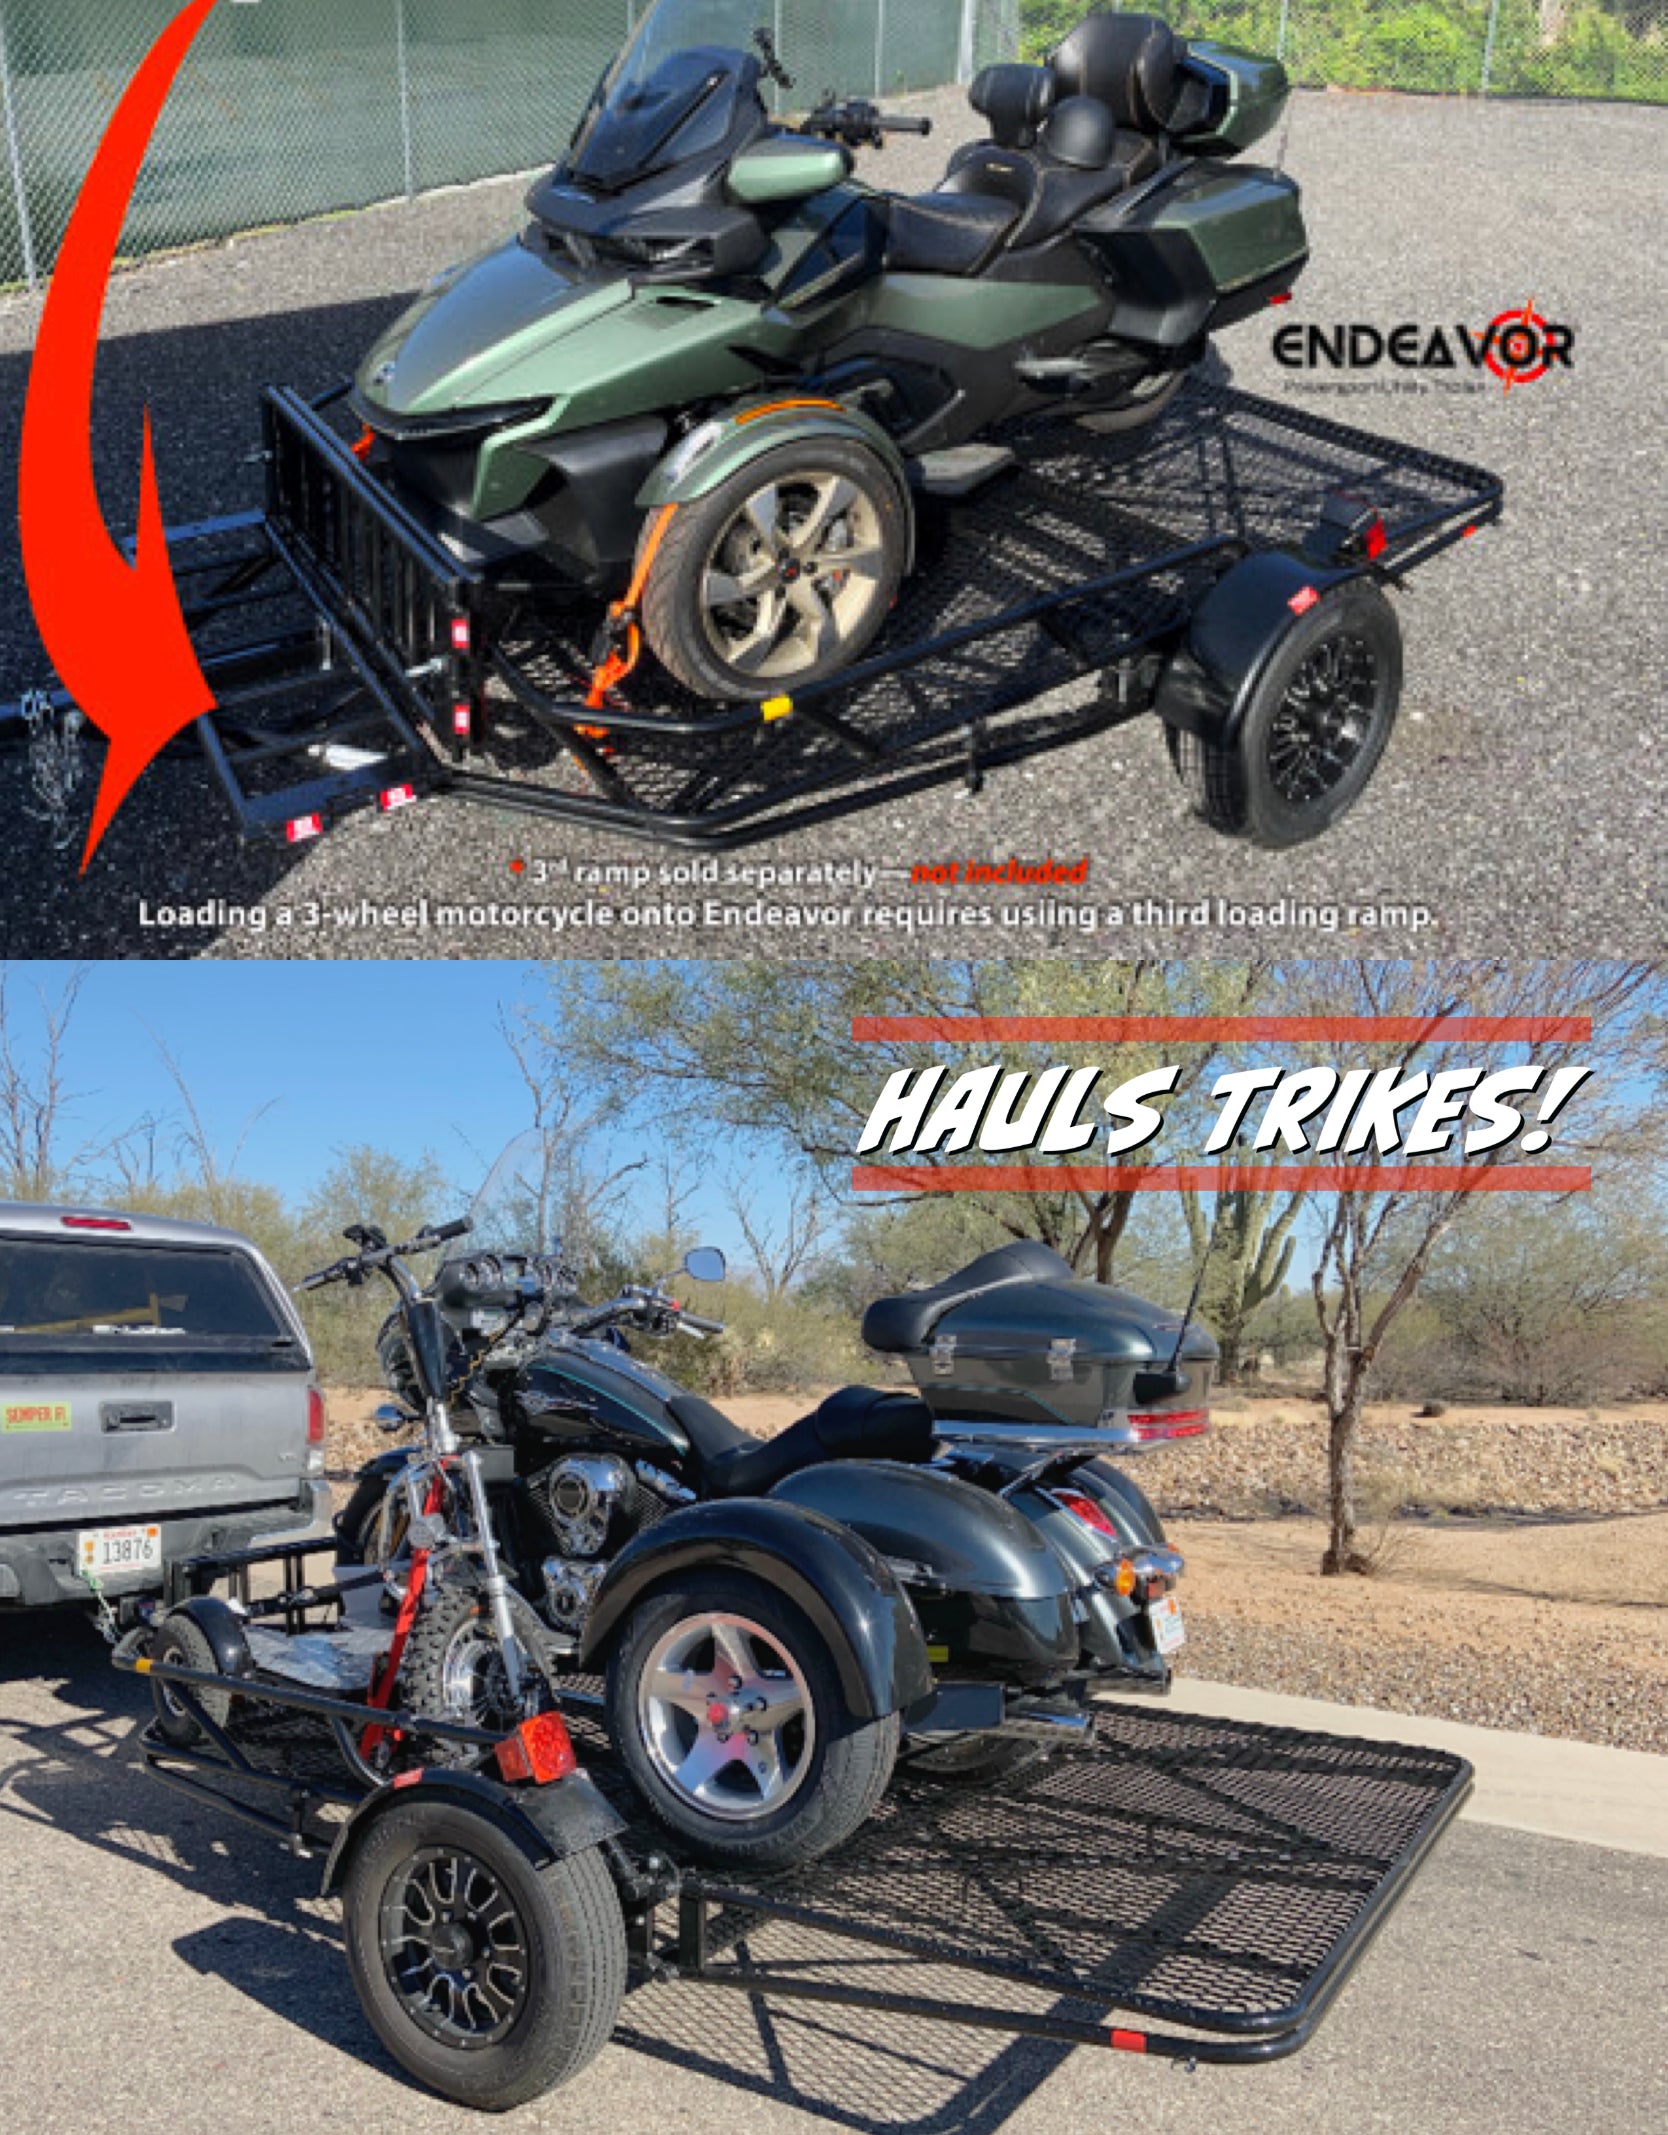 Trike trailer, can am ryker trailer hauls motorcycles and trike bikes